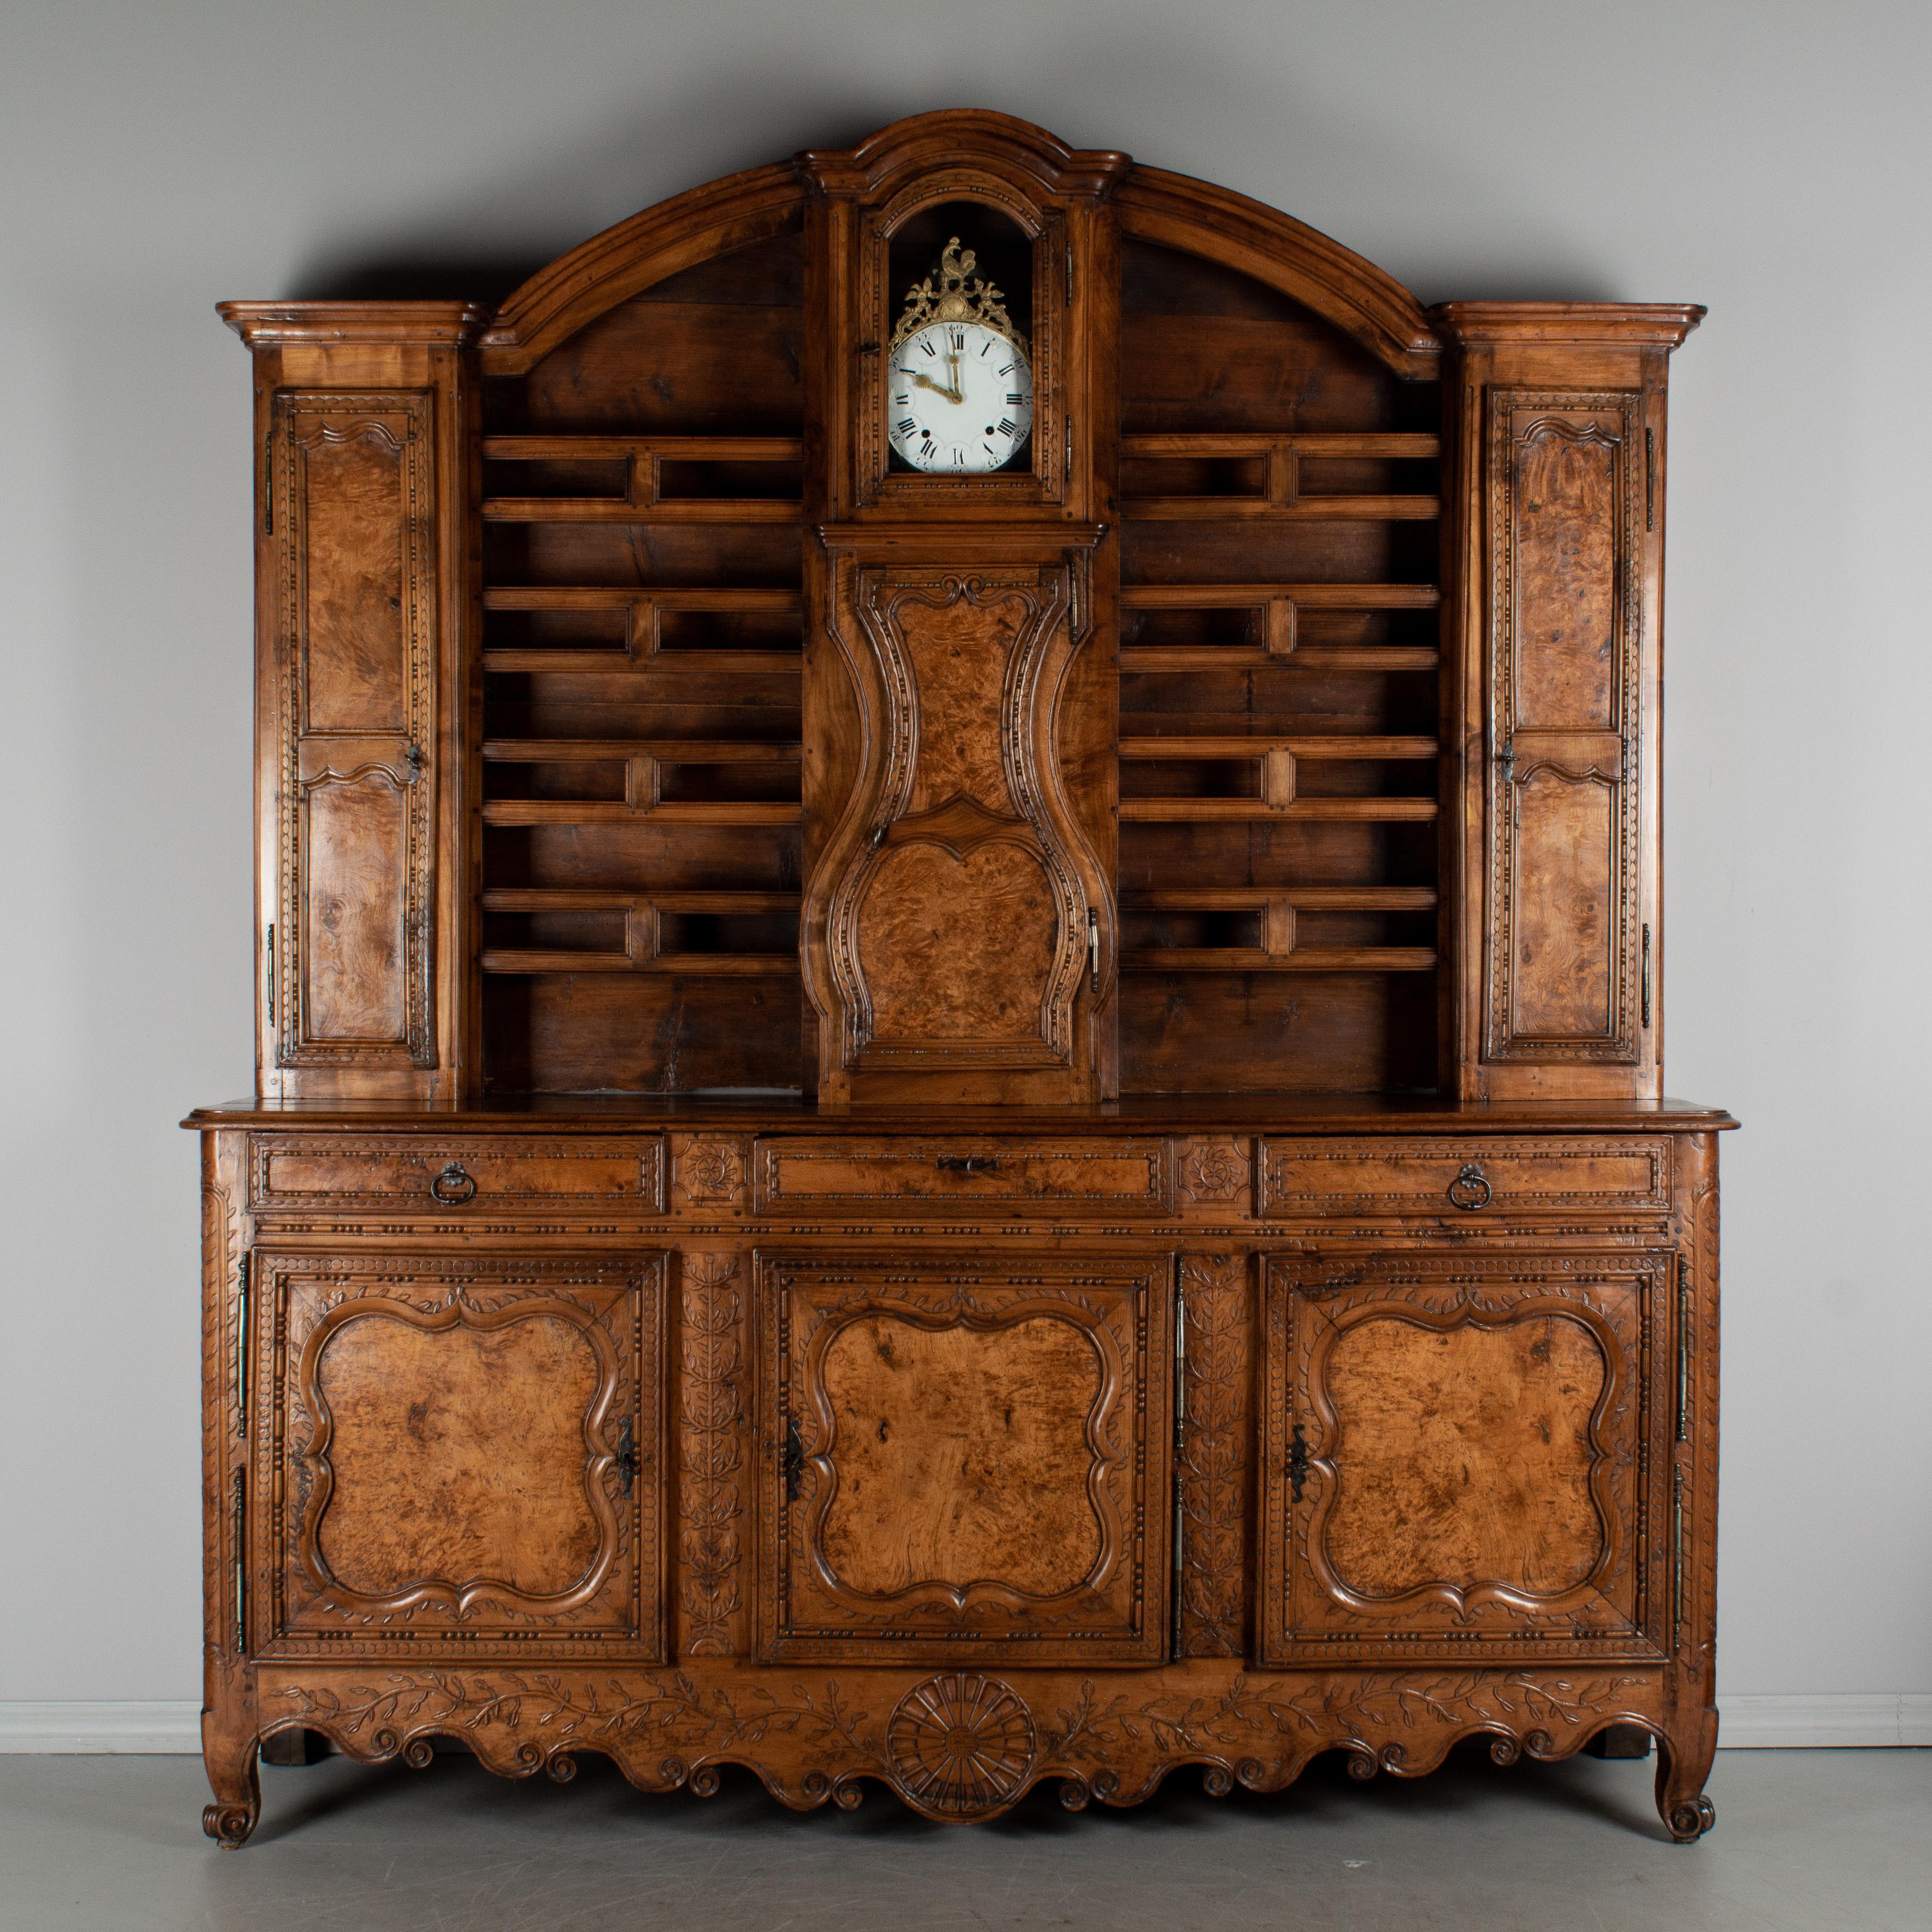 Hand-Carved 18th Century French Vaisselier or Sideboard with Clock